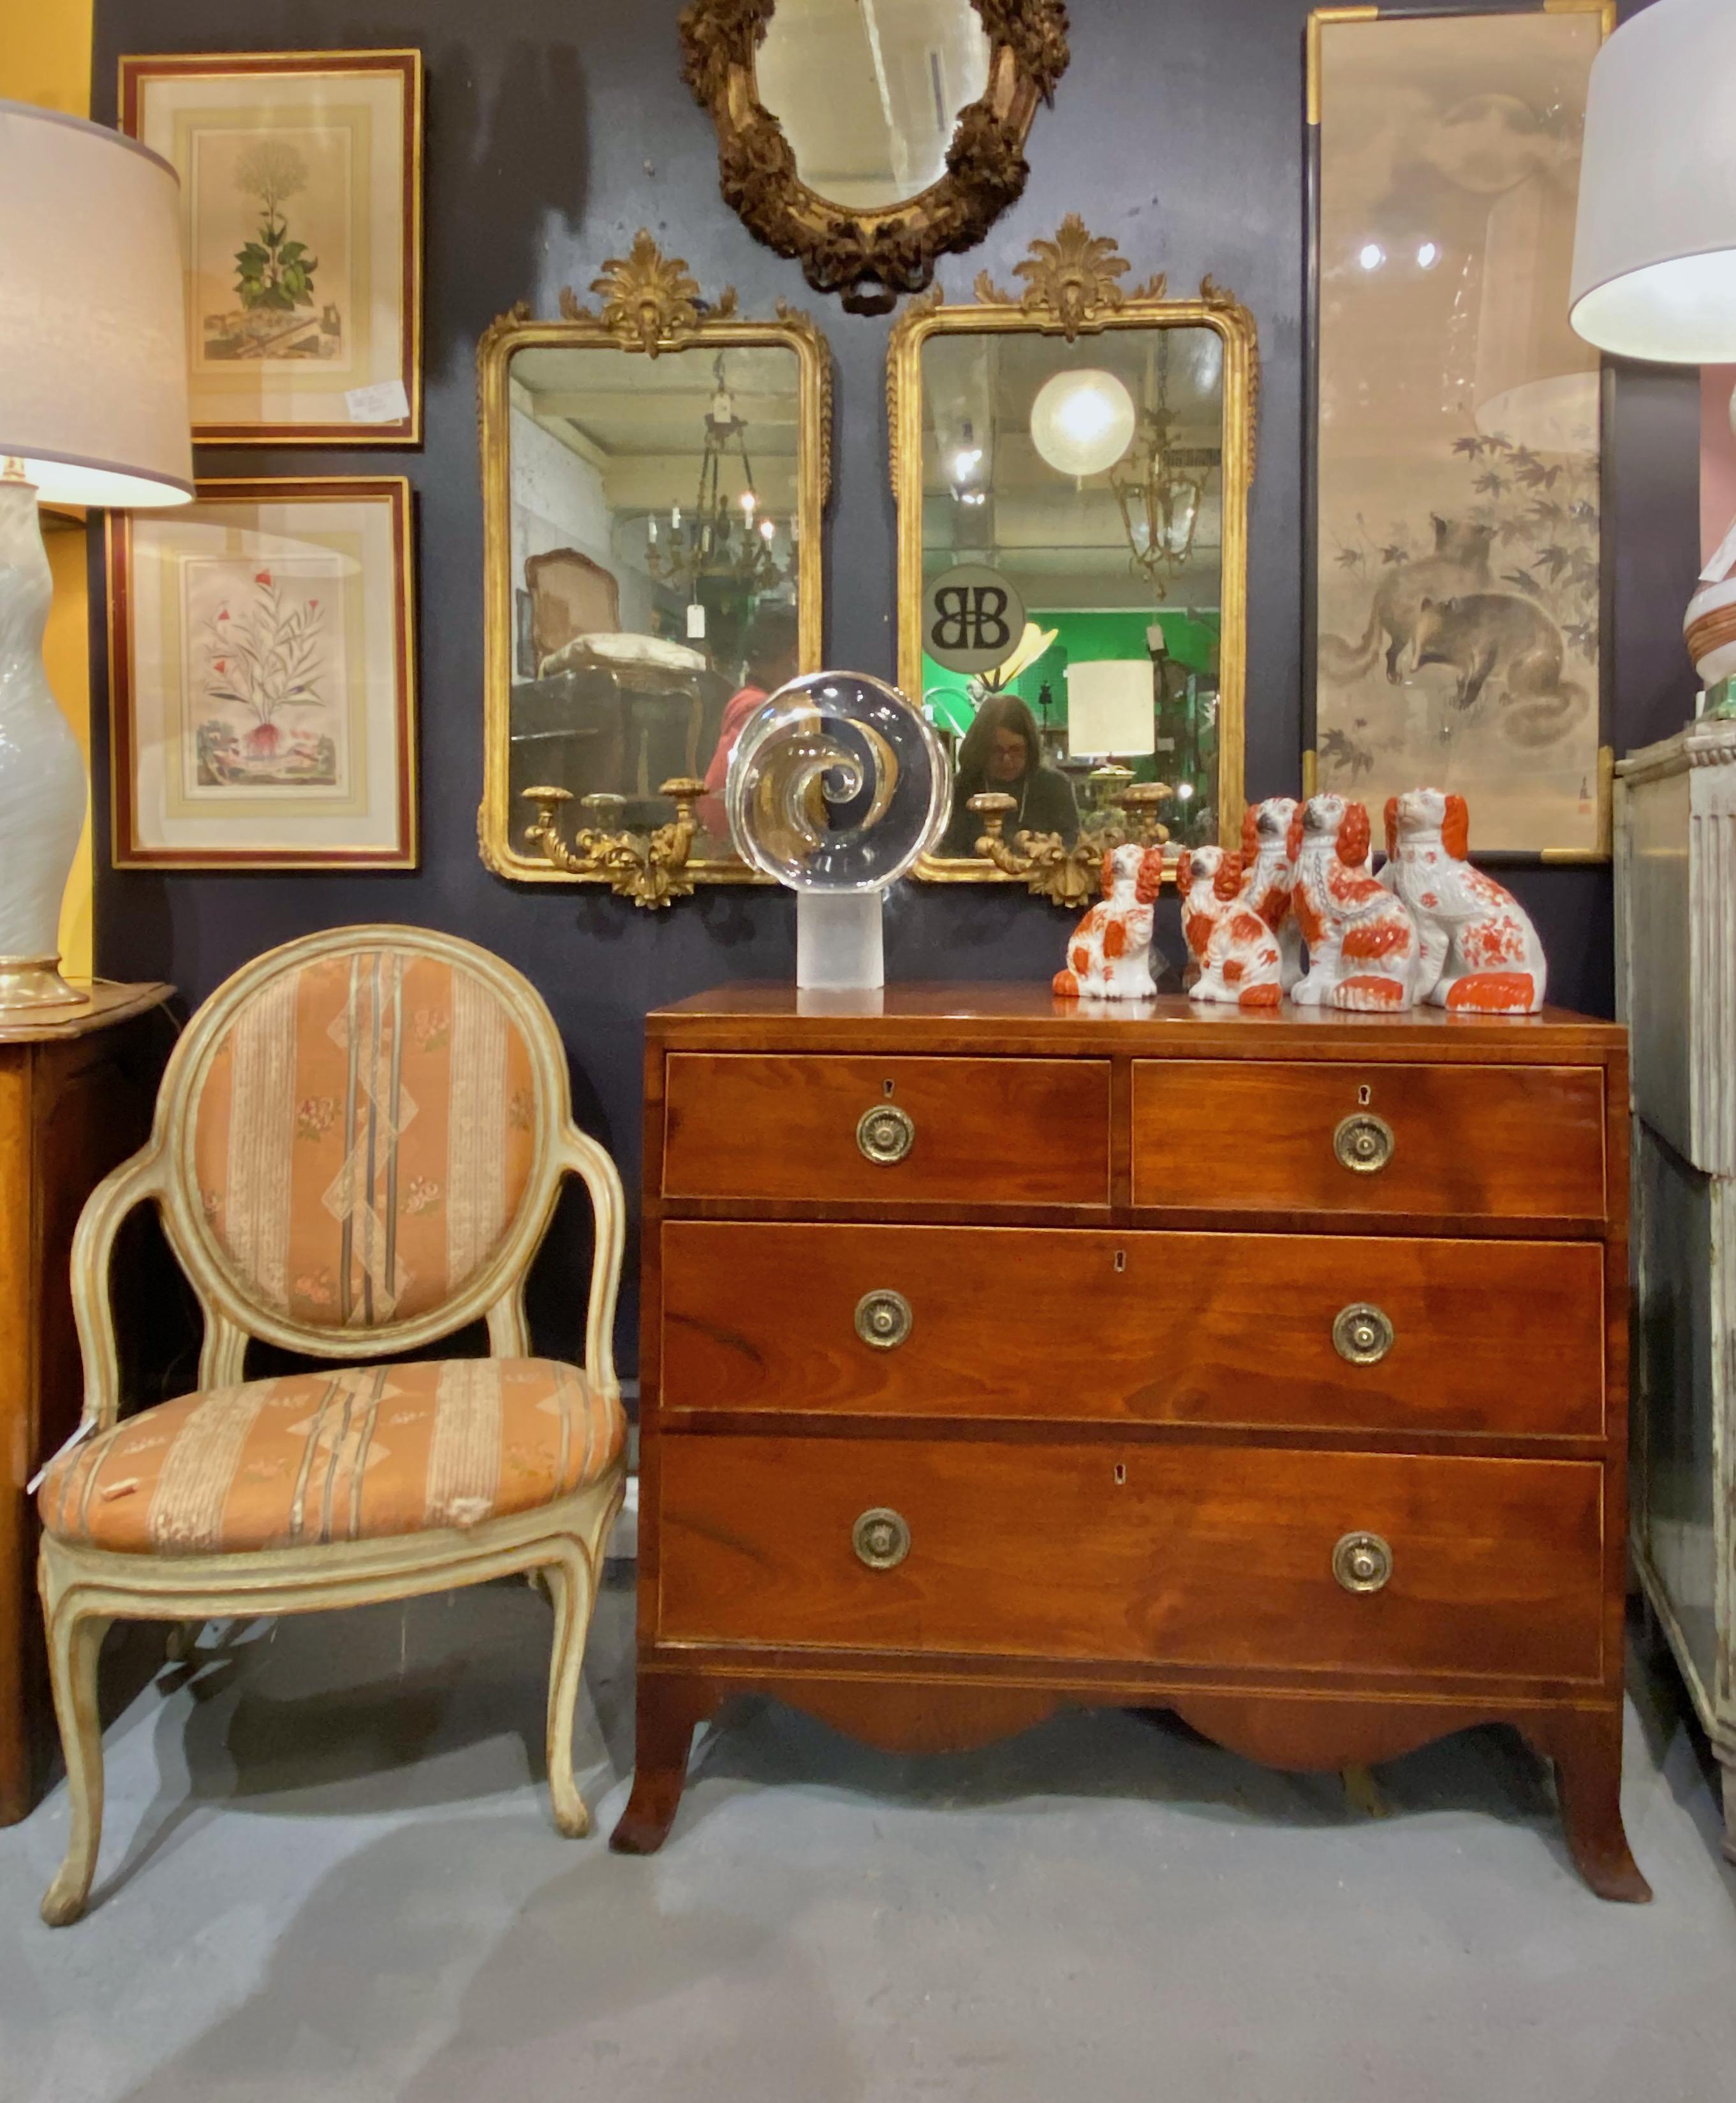 This is a classic George III mahogany with satinwood banding chest of drawers with a two-over-two configuration. The perfect and elegant proportions of the chest make this this piece an eye-catcher. The surface has been French polished, but it